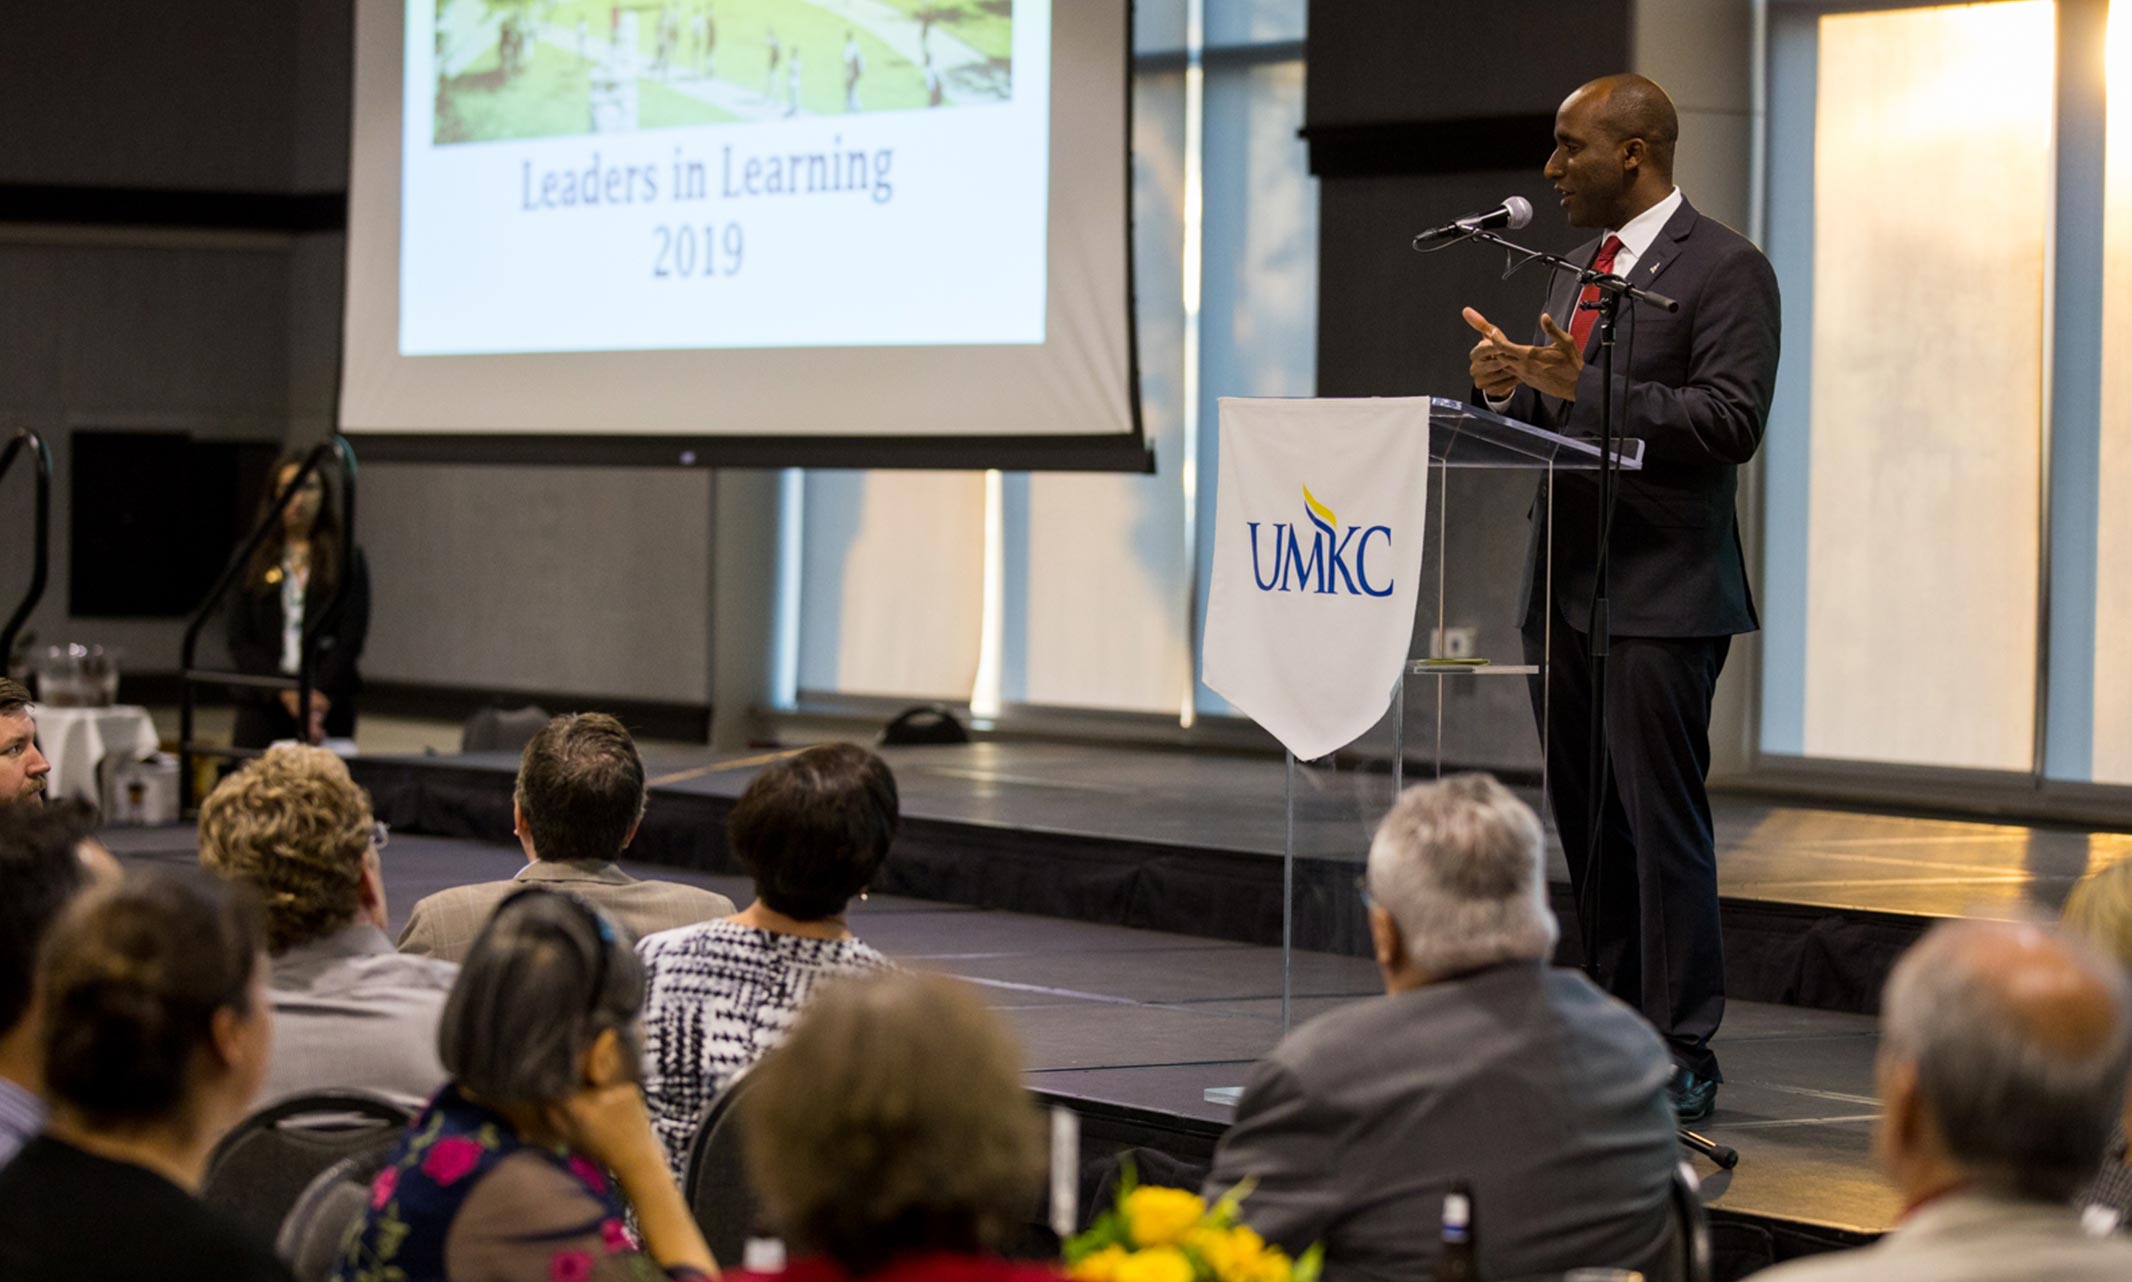 KCMO mayor Quinton Lucas addresses the faculty at the awards ceremony